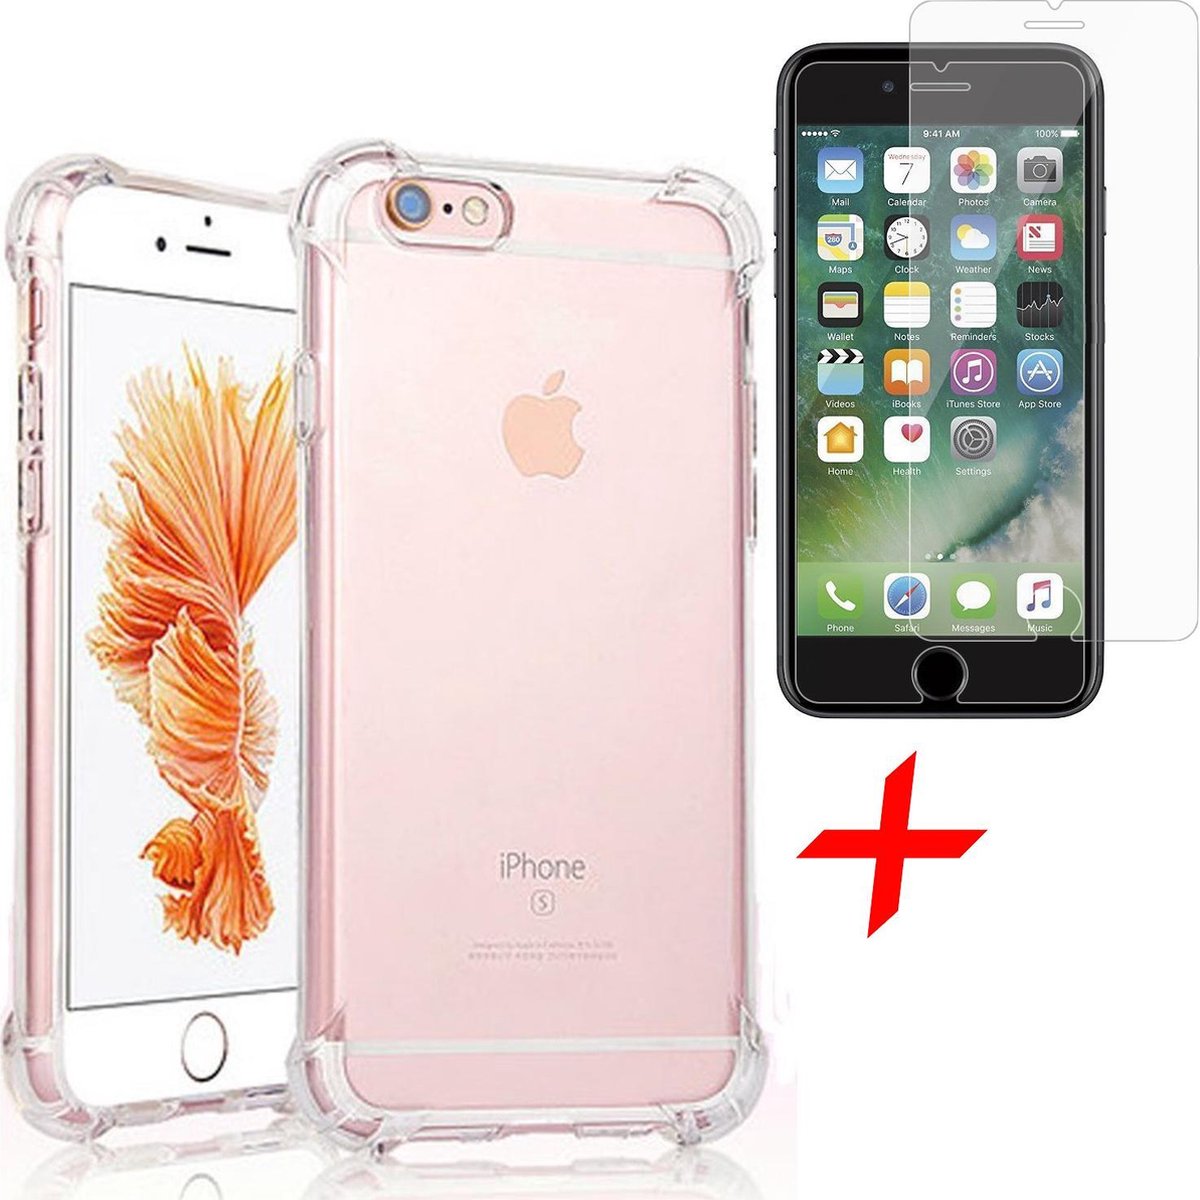 dictator Verlichten marketing iPhone 6s Plus / 6 Plus Hoesje - Anti Shock Proof Siliconen Back Cover Case Hoes  Transparant - Tempered Glass Screenprotector